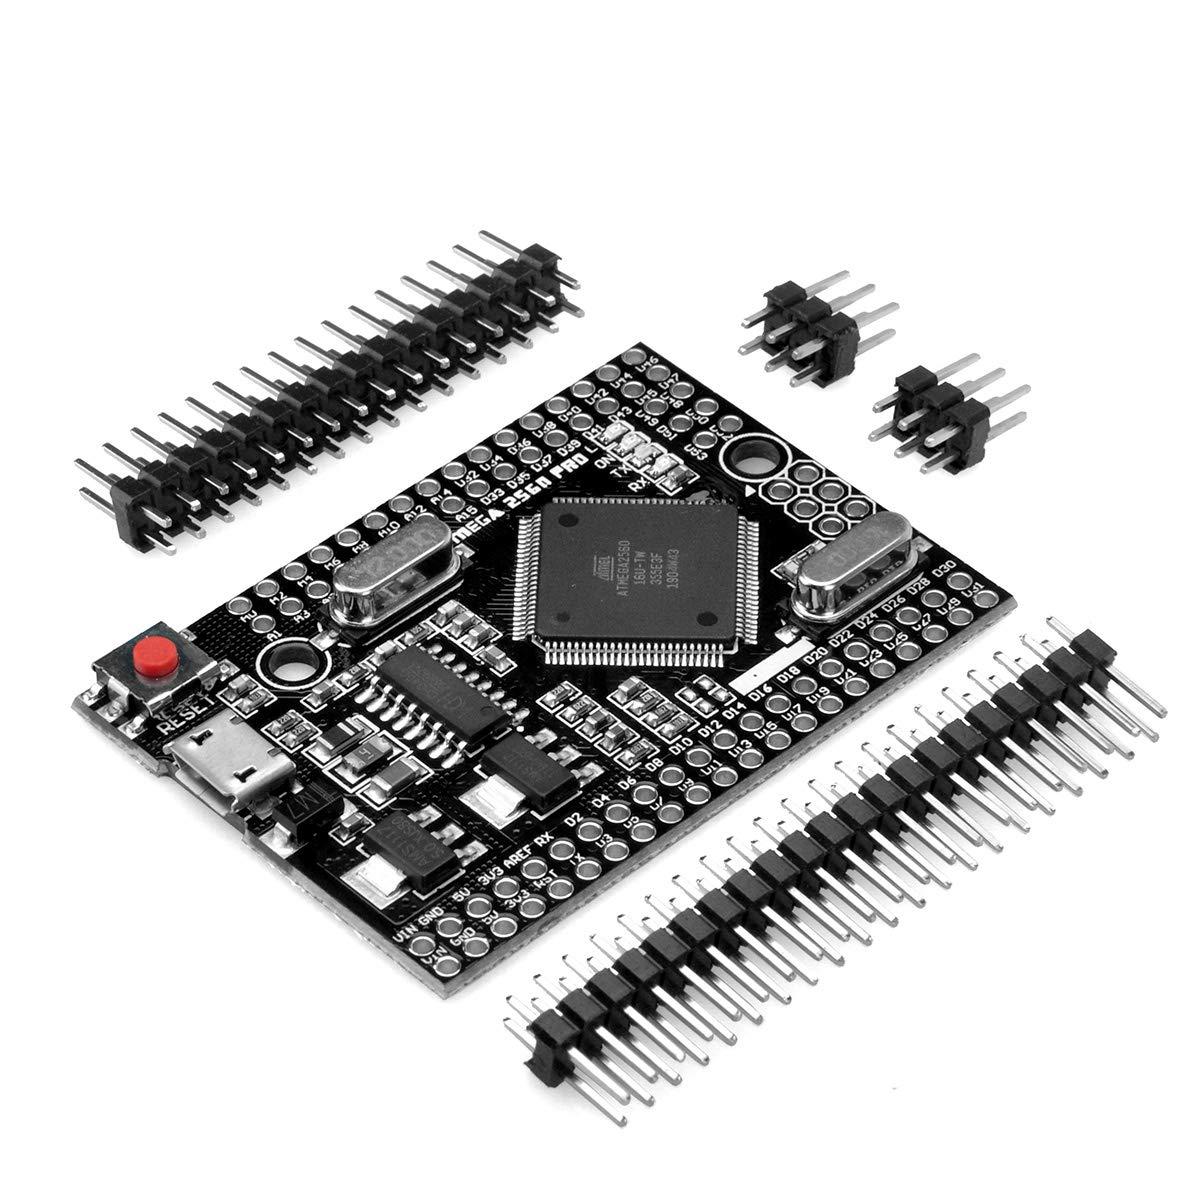 MEGA2560 PRO Board Embed CH340G/ATMEGA2560-16AU Chip with Male pin headers, Compatible for arduino Mega2560 DIY